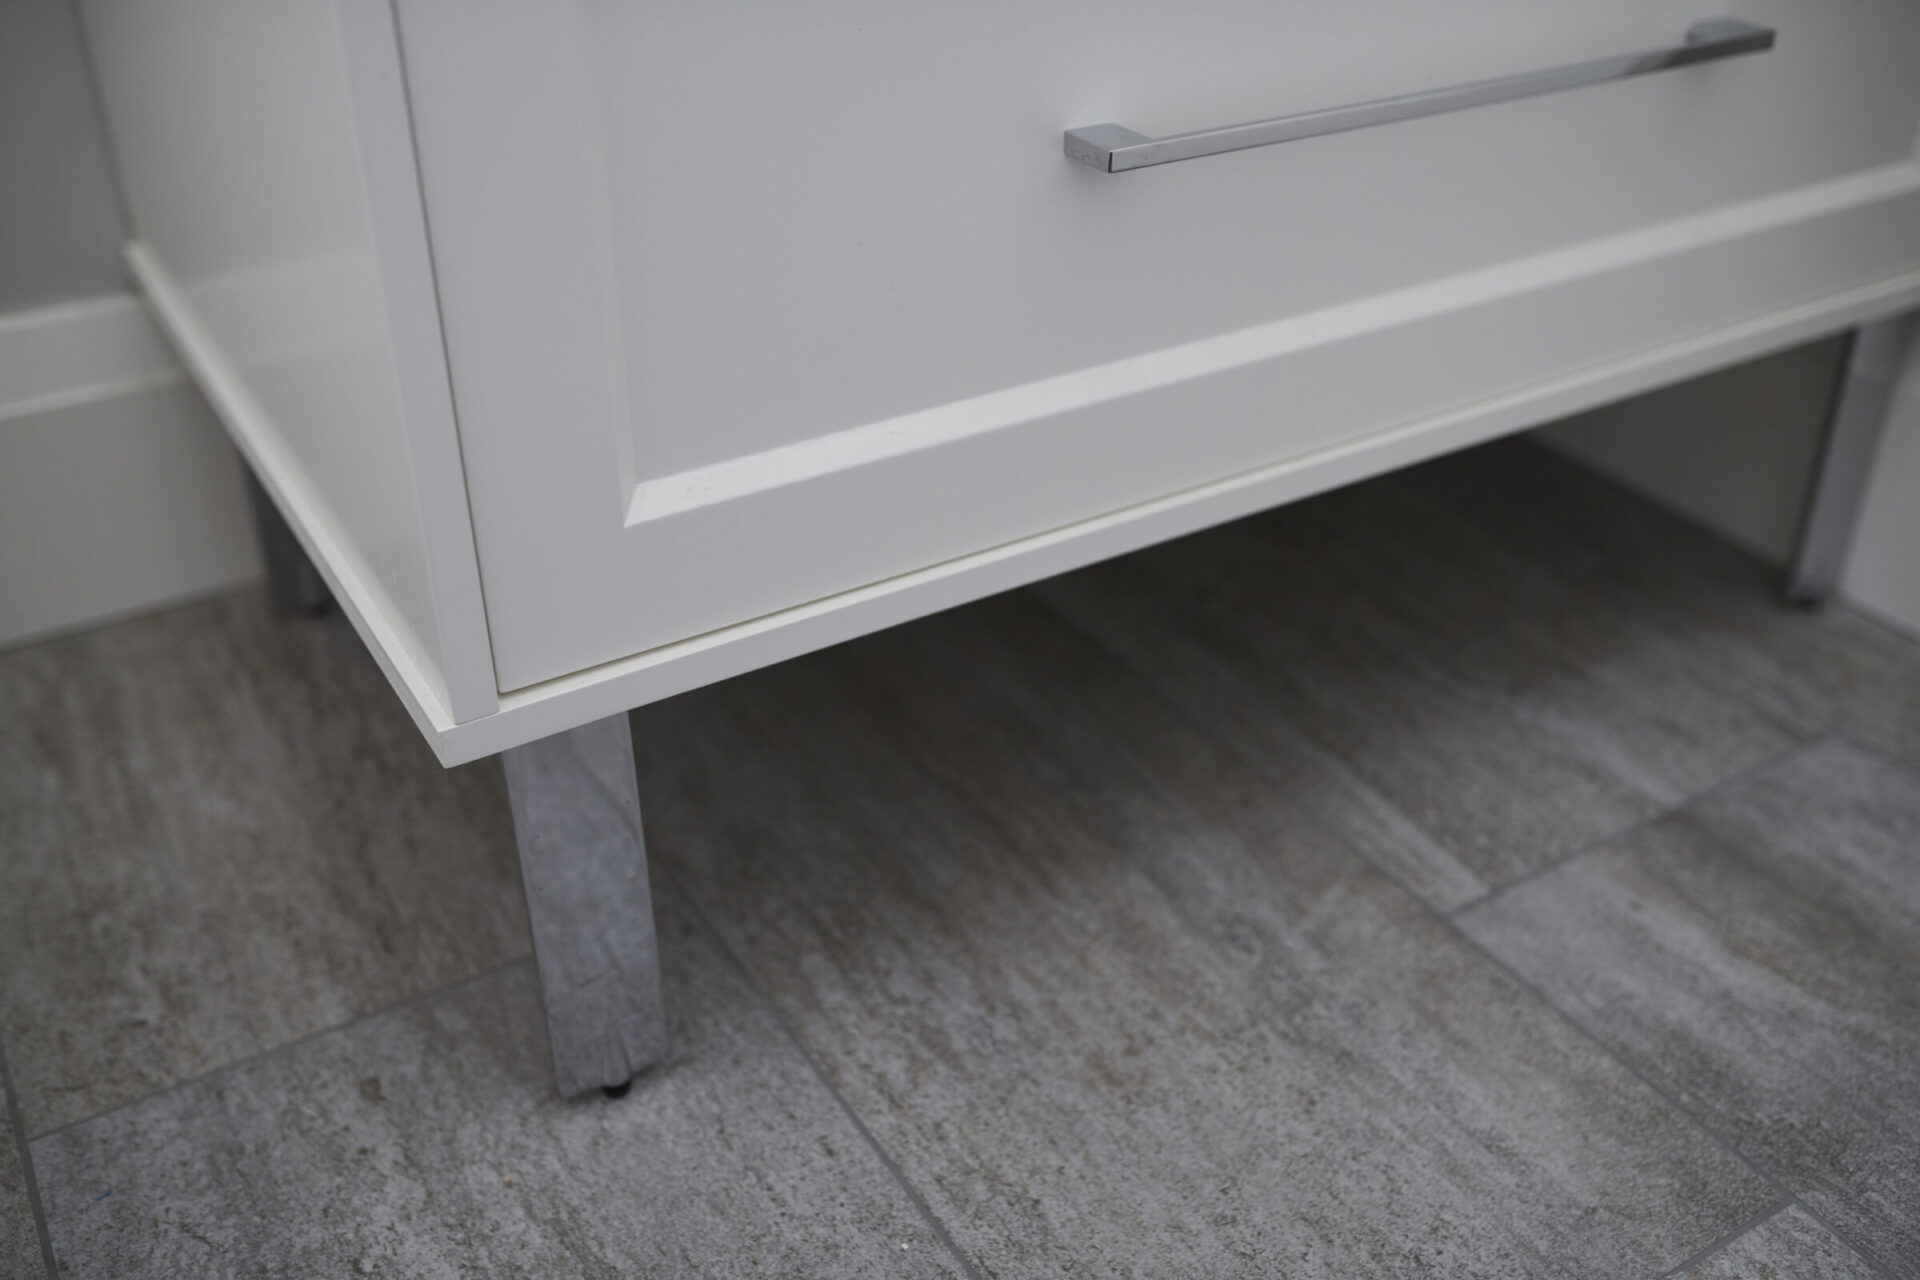 A close-up view of a white cabinet with a modern handle, showing a partial drawer and leg, resting on a grey tiled floor.